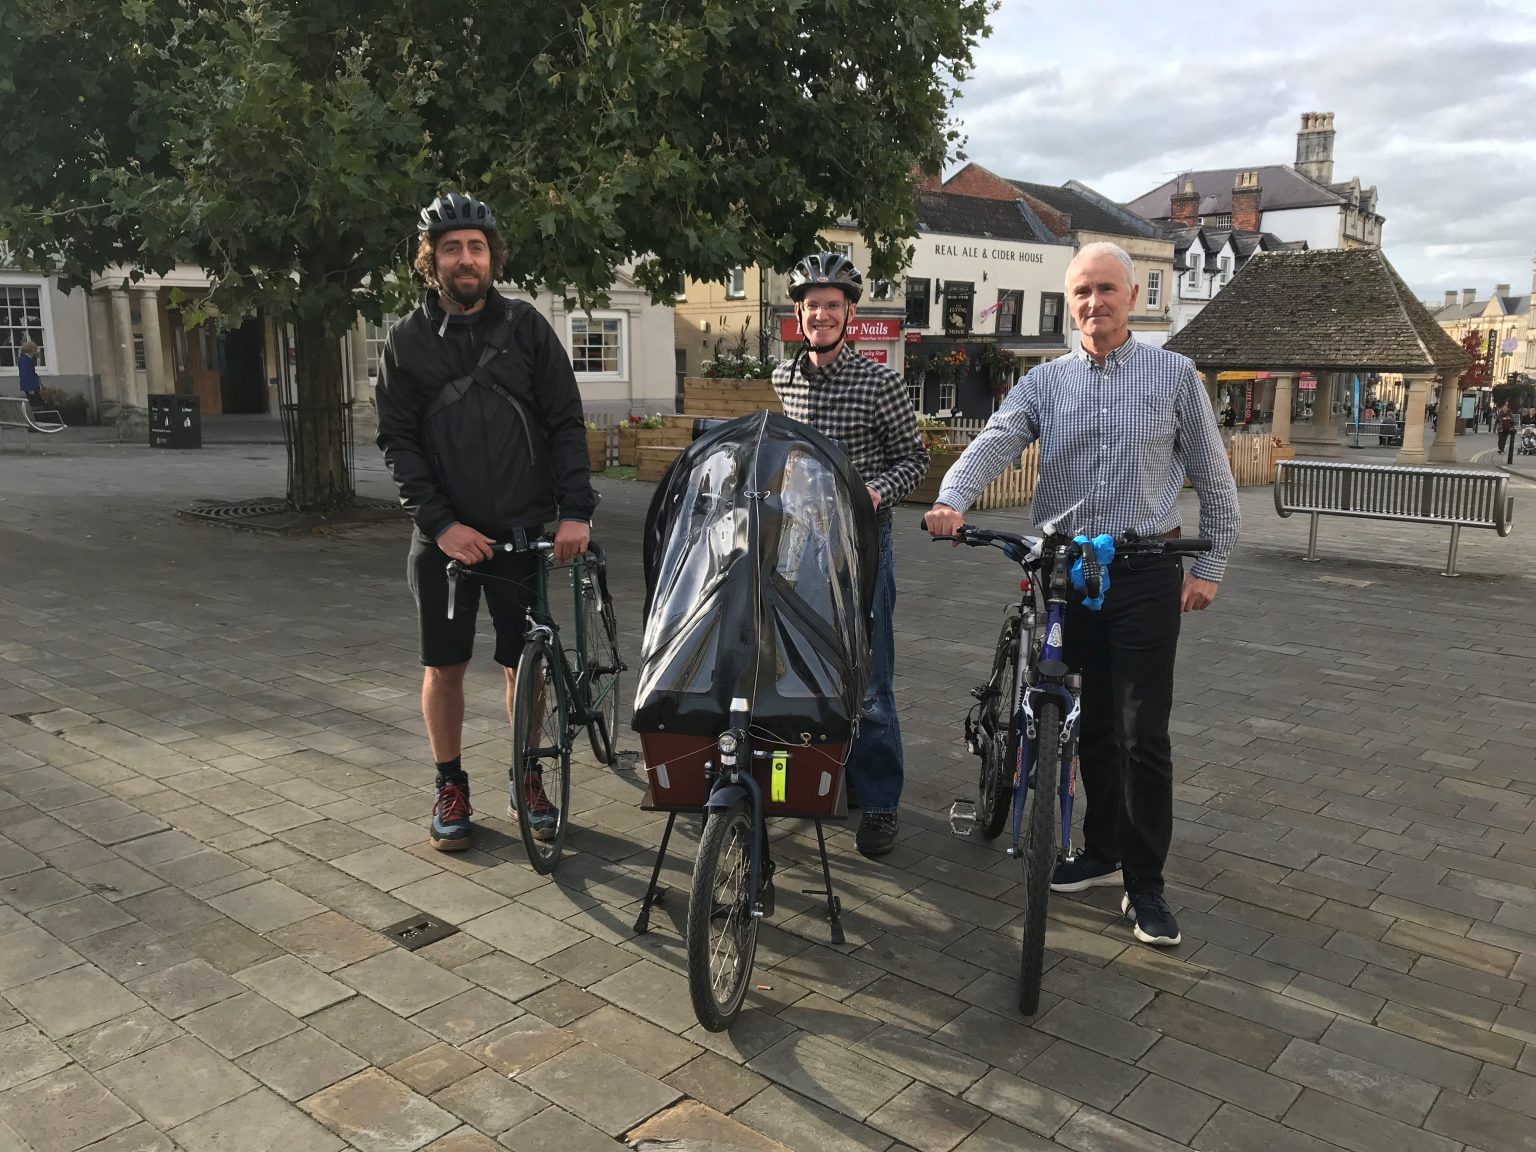 L to R - Cycle Chippenham's Rob Elkins, Treasurer, Laurence Cable, Vice Chair, Nick Murry, Cha